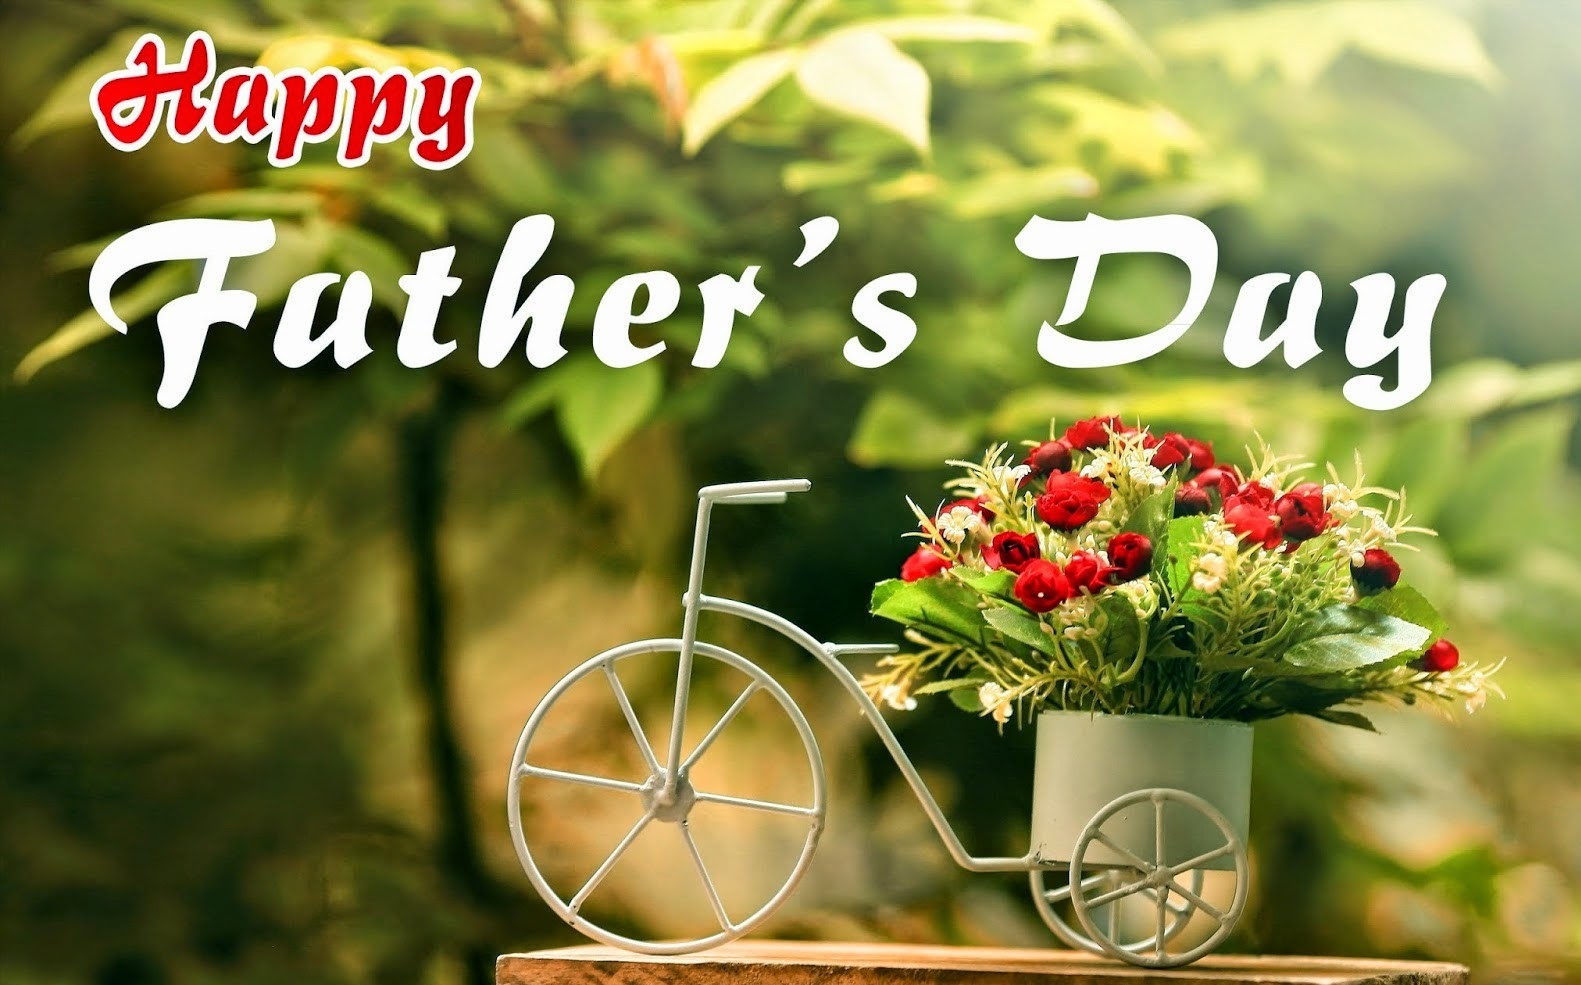 Best] Happy Fathers day 2015 images,pictures,wallpapers for ...